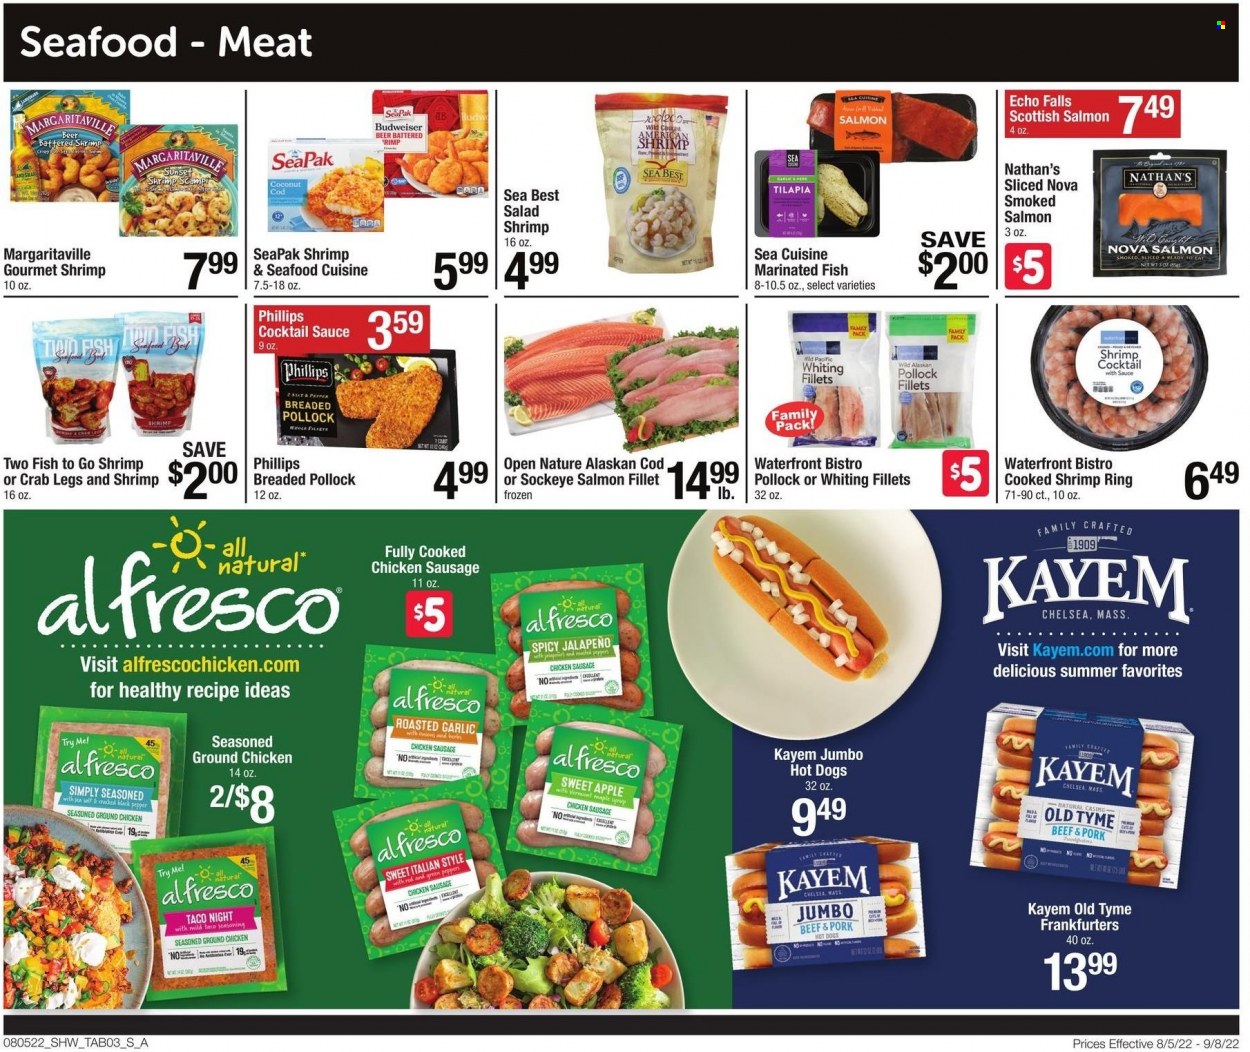 thumbnail - Shaw’s Flyer - 08/05/2022 - 09/08/2022 - Sales products - onion, jalapeño, coconut, cod, salmon, salmon fillet, smoked salmon, tilapia, pollock, seafood, crab legs, crab, fish, shrimps, whiting fillets, hot dog, sausage, chicken sausage, black pepper, spice, cocktail sauce, maple syrup, syrup, beer, ground chicken, Budweiser. Page 3.